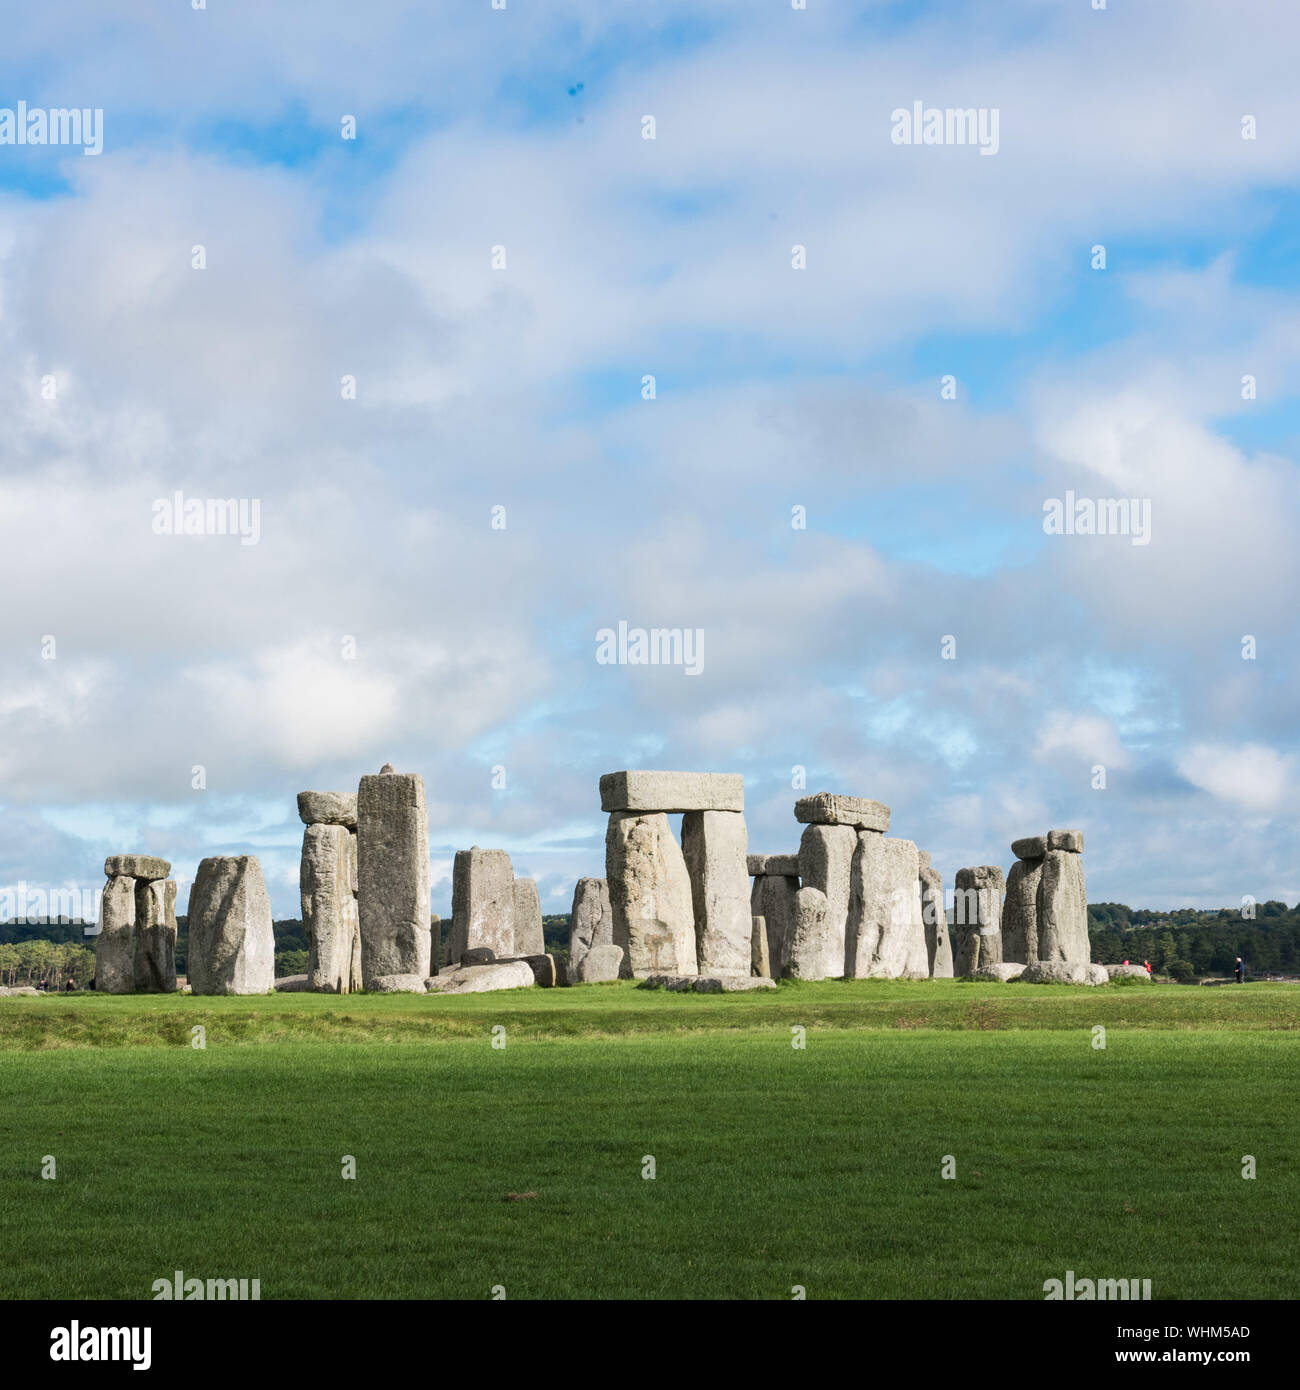 Megalith Rocks On Grassy Field Against Cloudy Sky Stock Photo